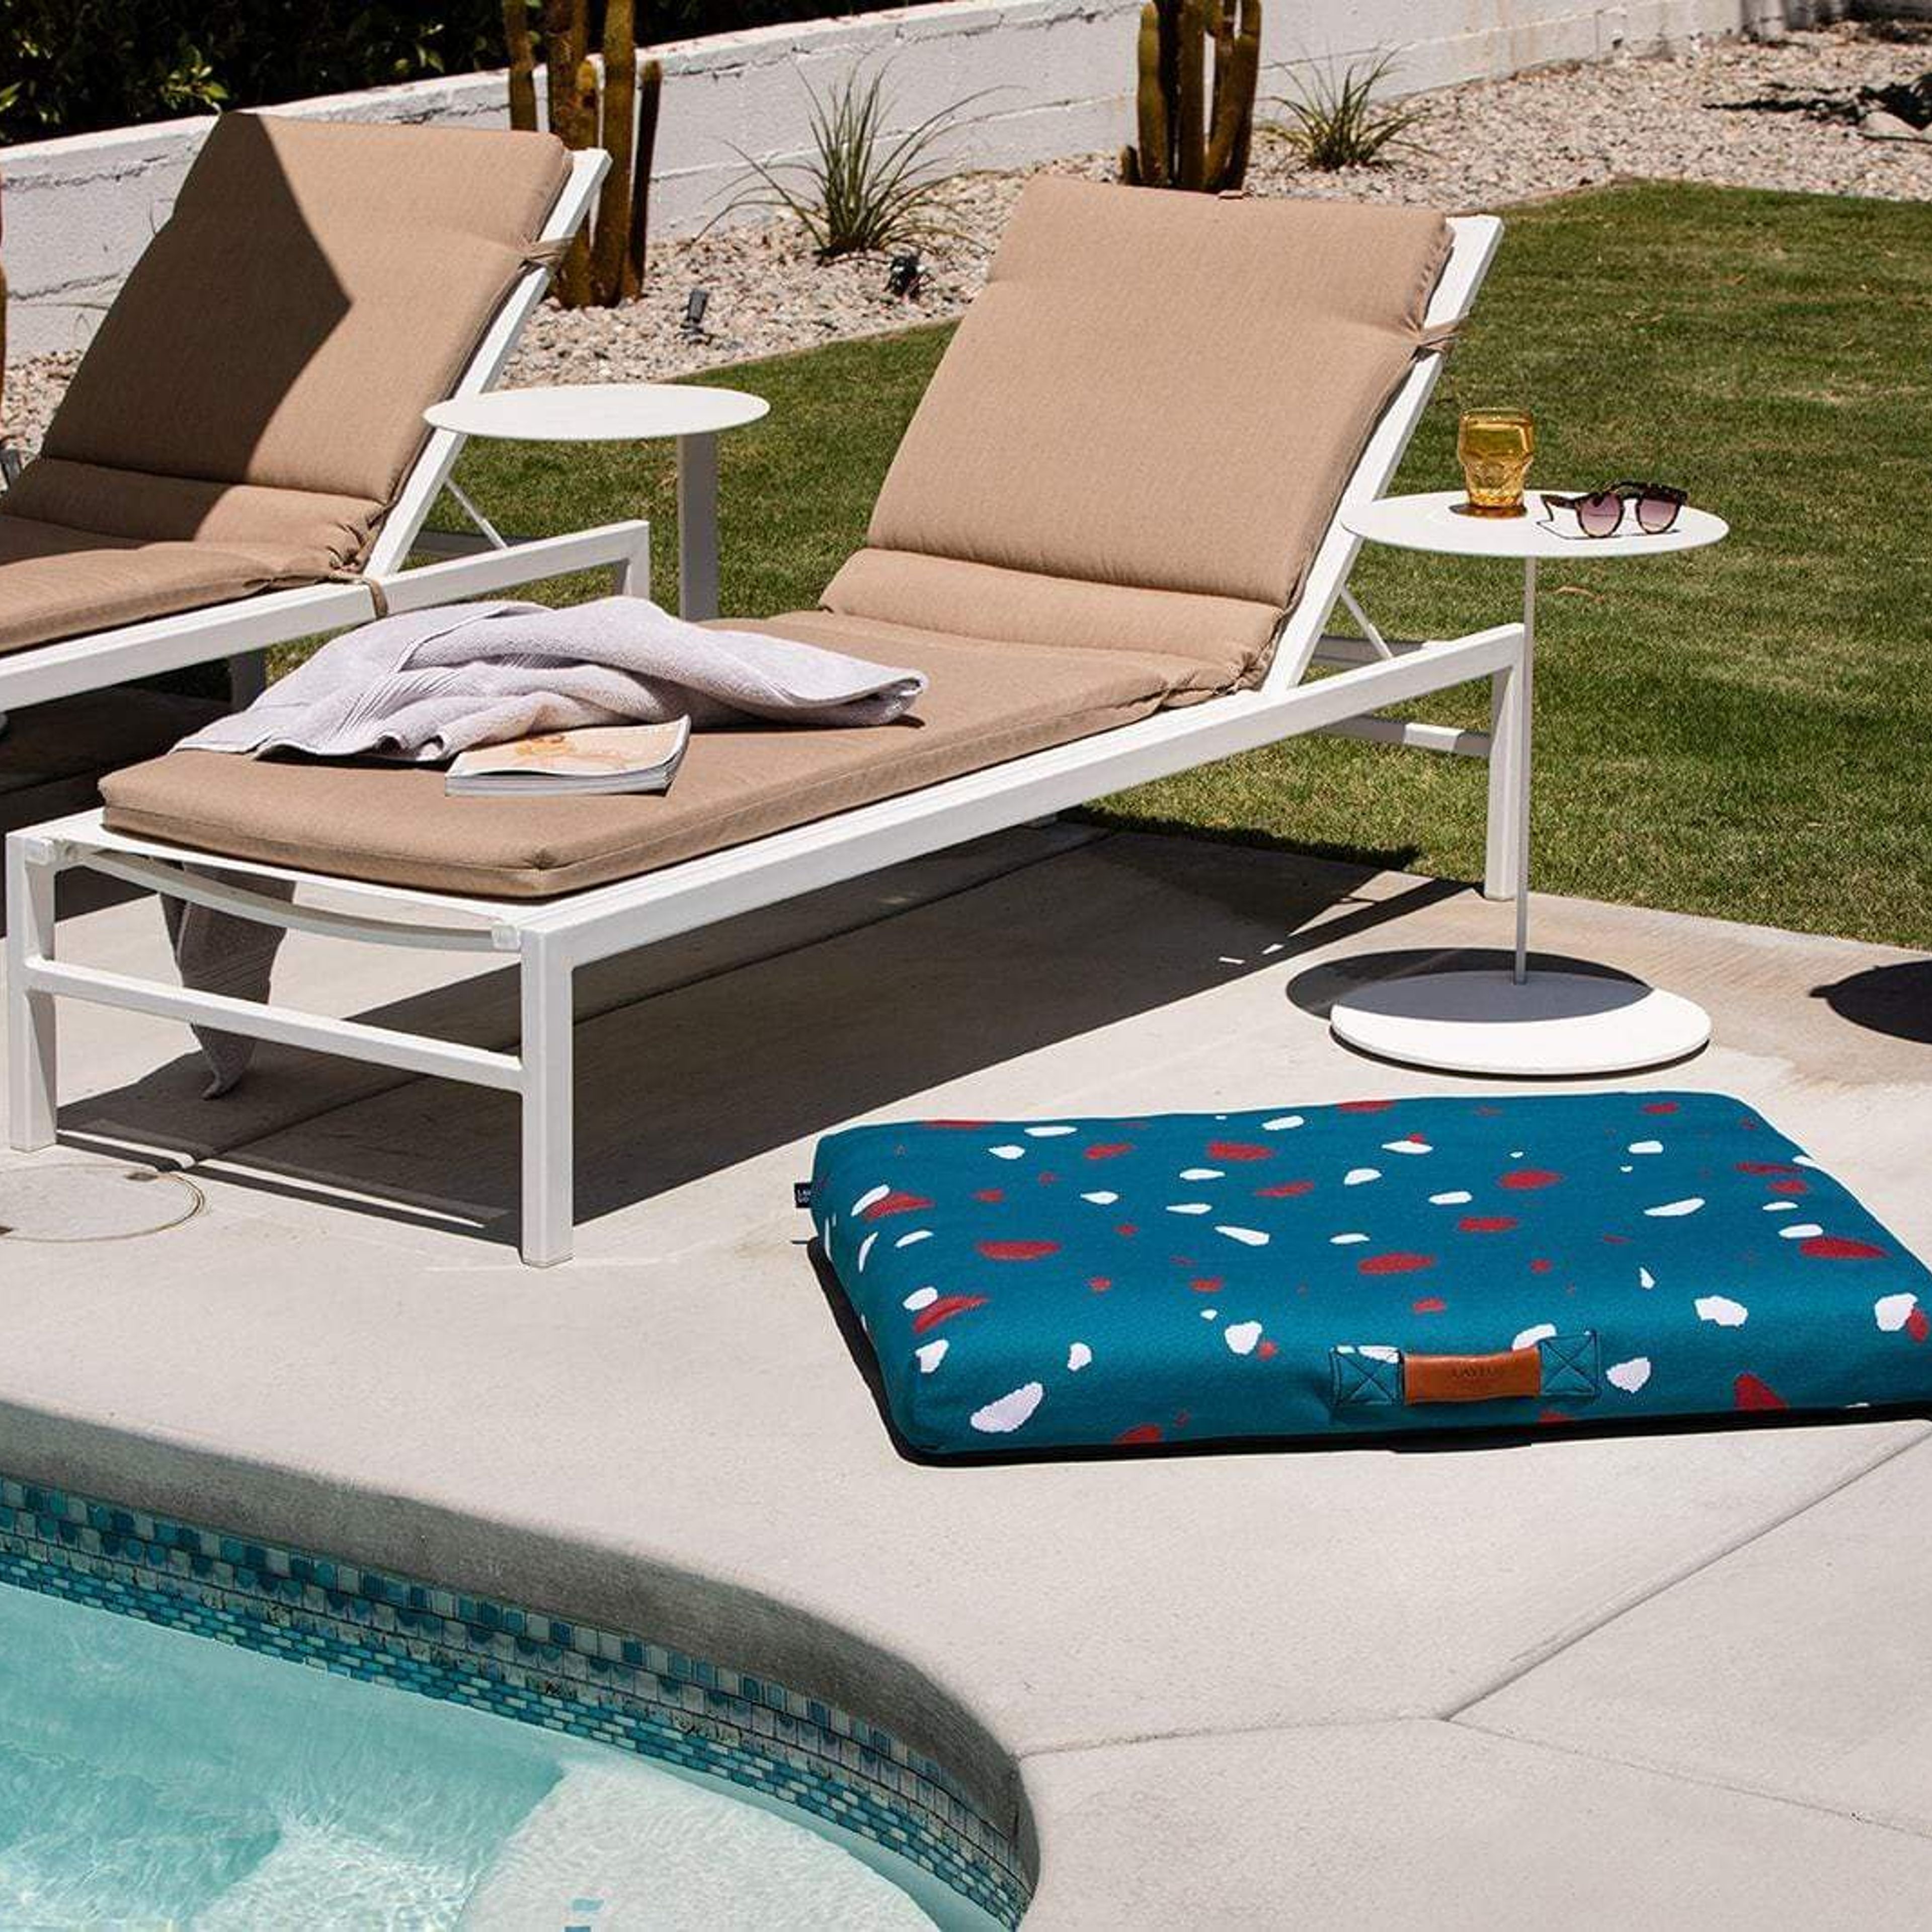 Teal Terrazzo | Mid-Century Modern Dog Bed or Bed Cover